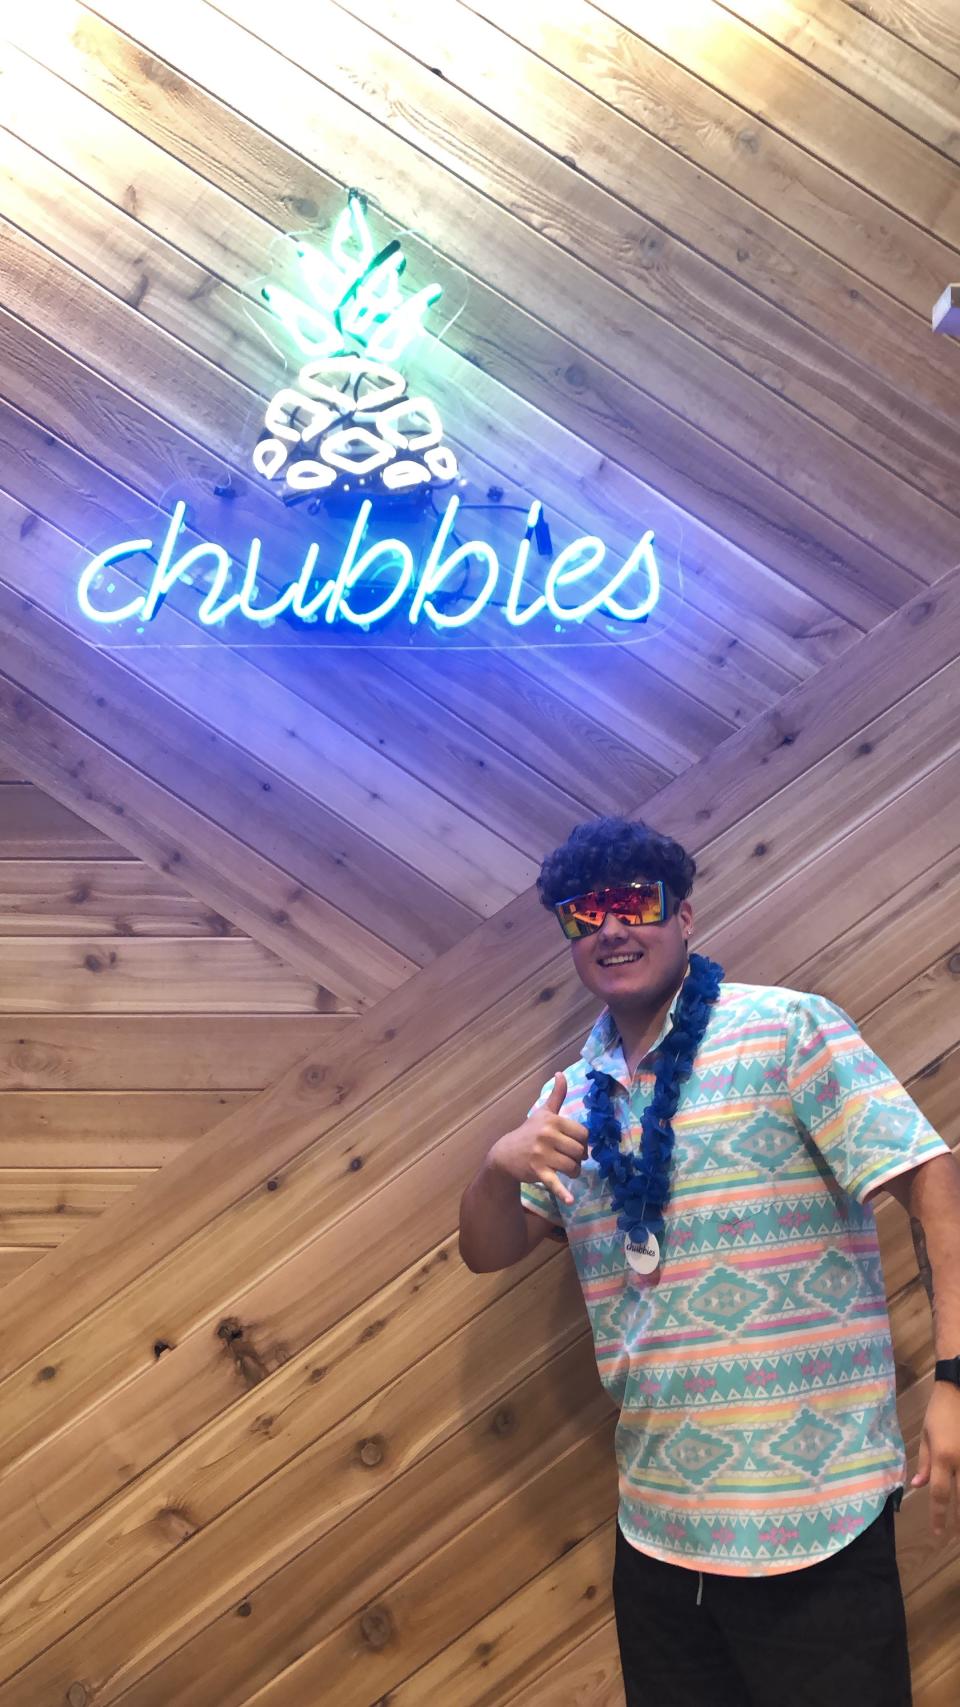 Being creative for the photos is part of what goes into becoming a Chubbies model. Nate Jones took a shot at Chubbies’ modeling competition in the spring of 2023.